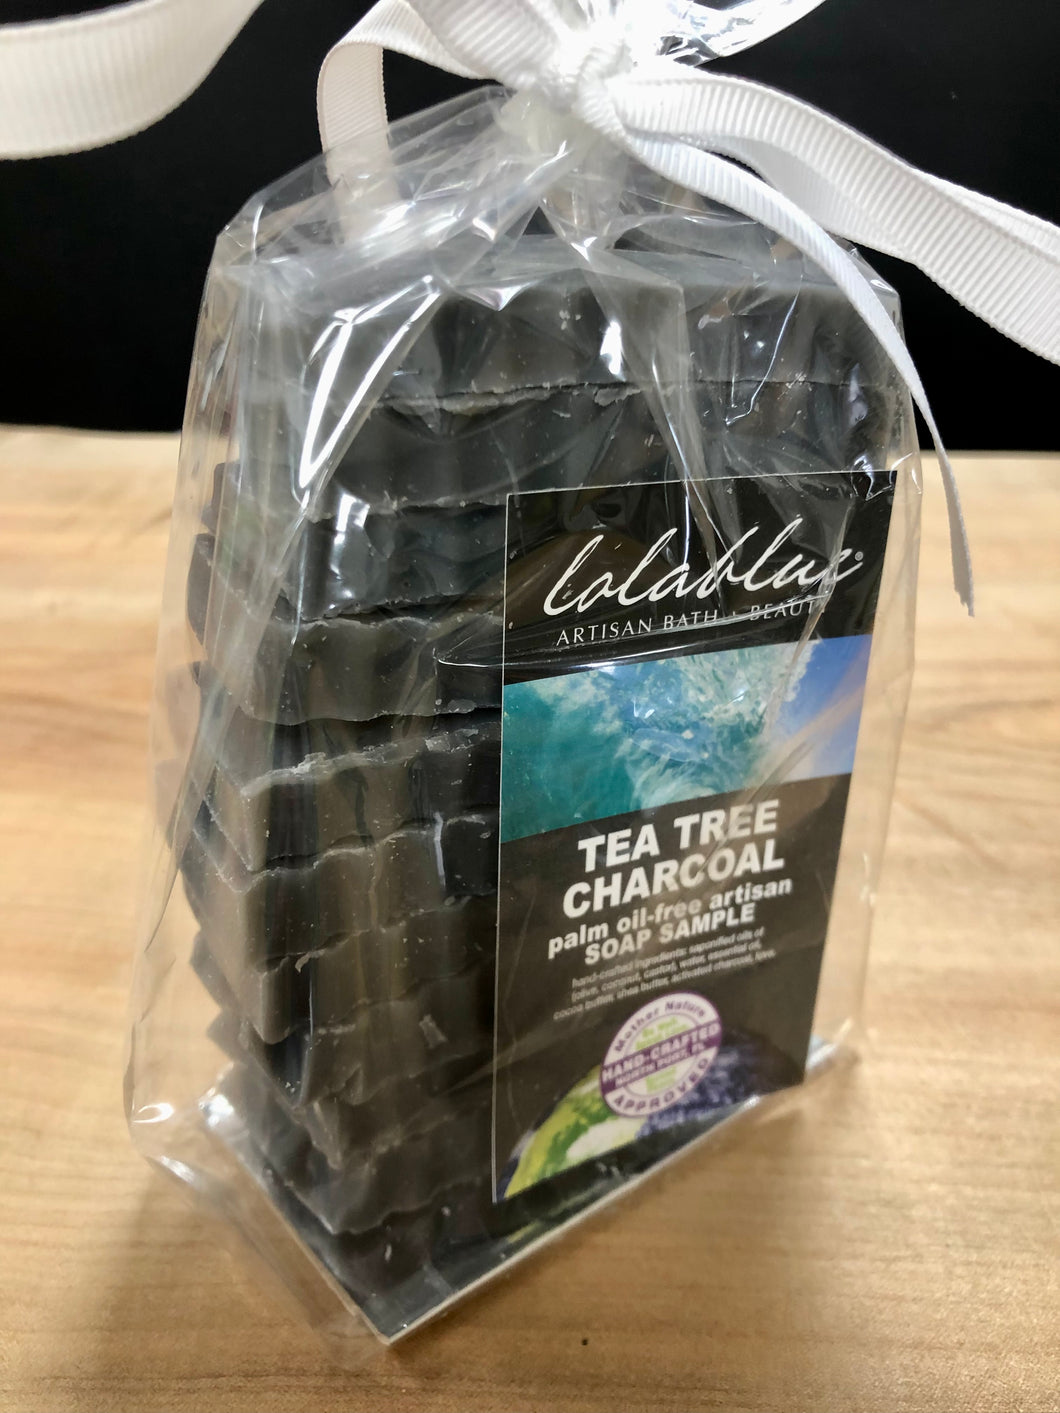 50% OFF! Year end sale. Tea Tree Charcoal- One HALF POUND Bag of soap ends/travel sizes